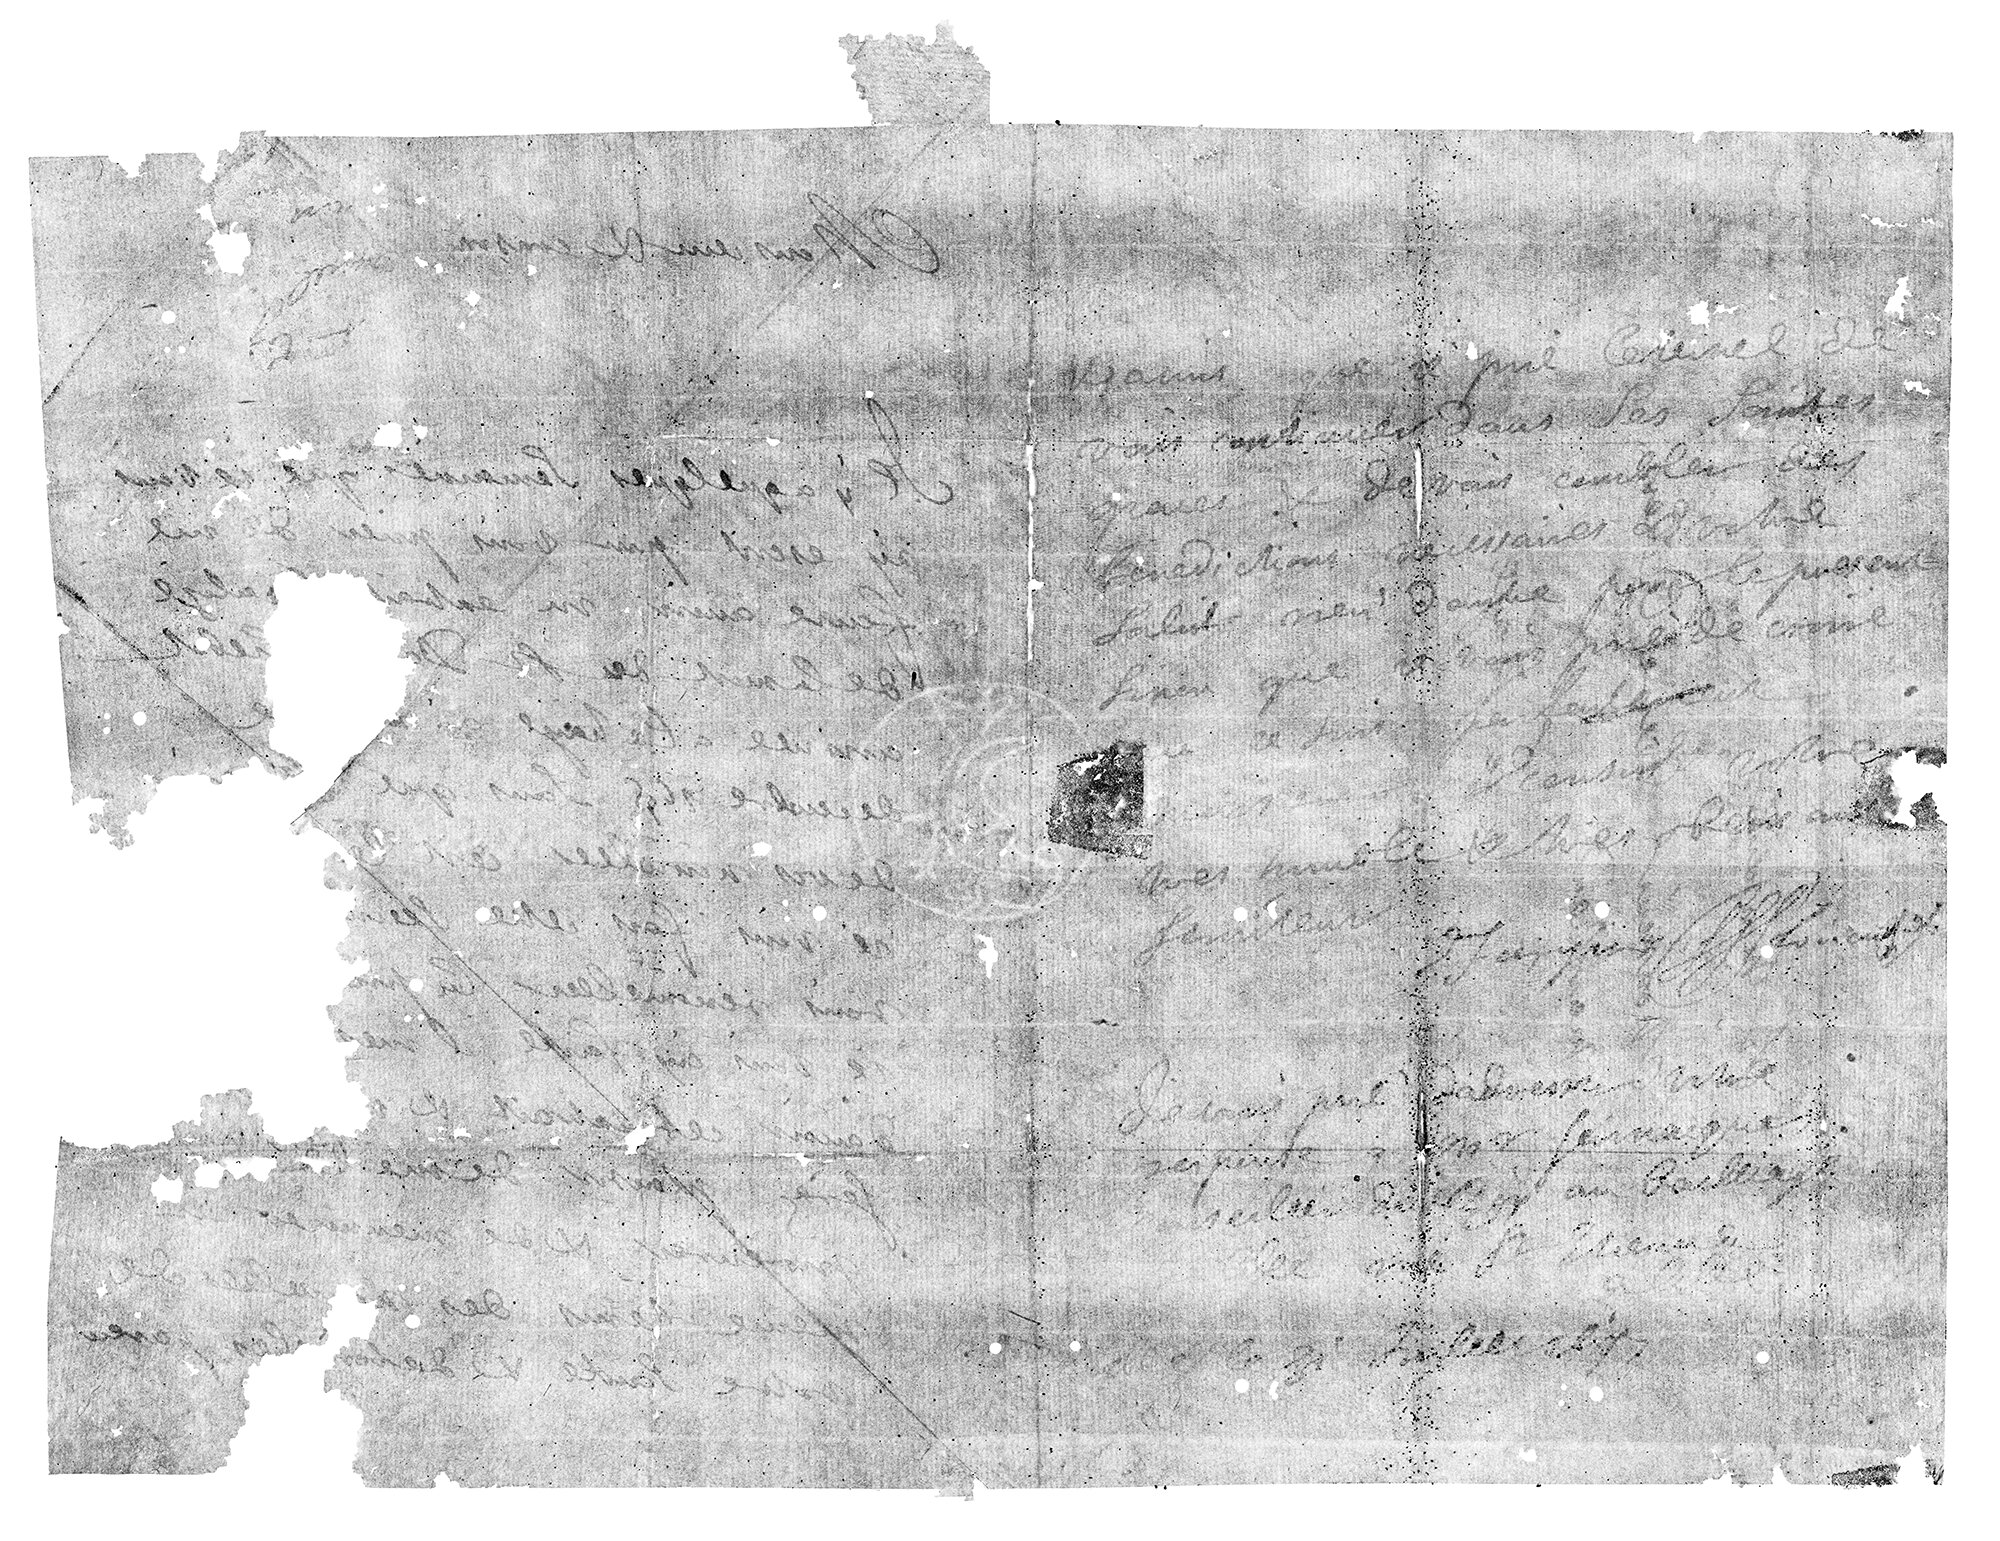 Secrets of sealed 17th-century letters unveiled by dental X-ray scanners